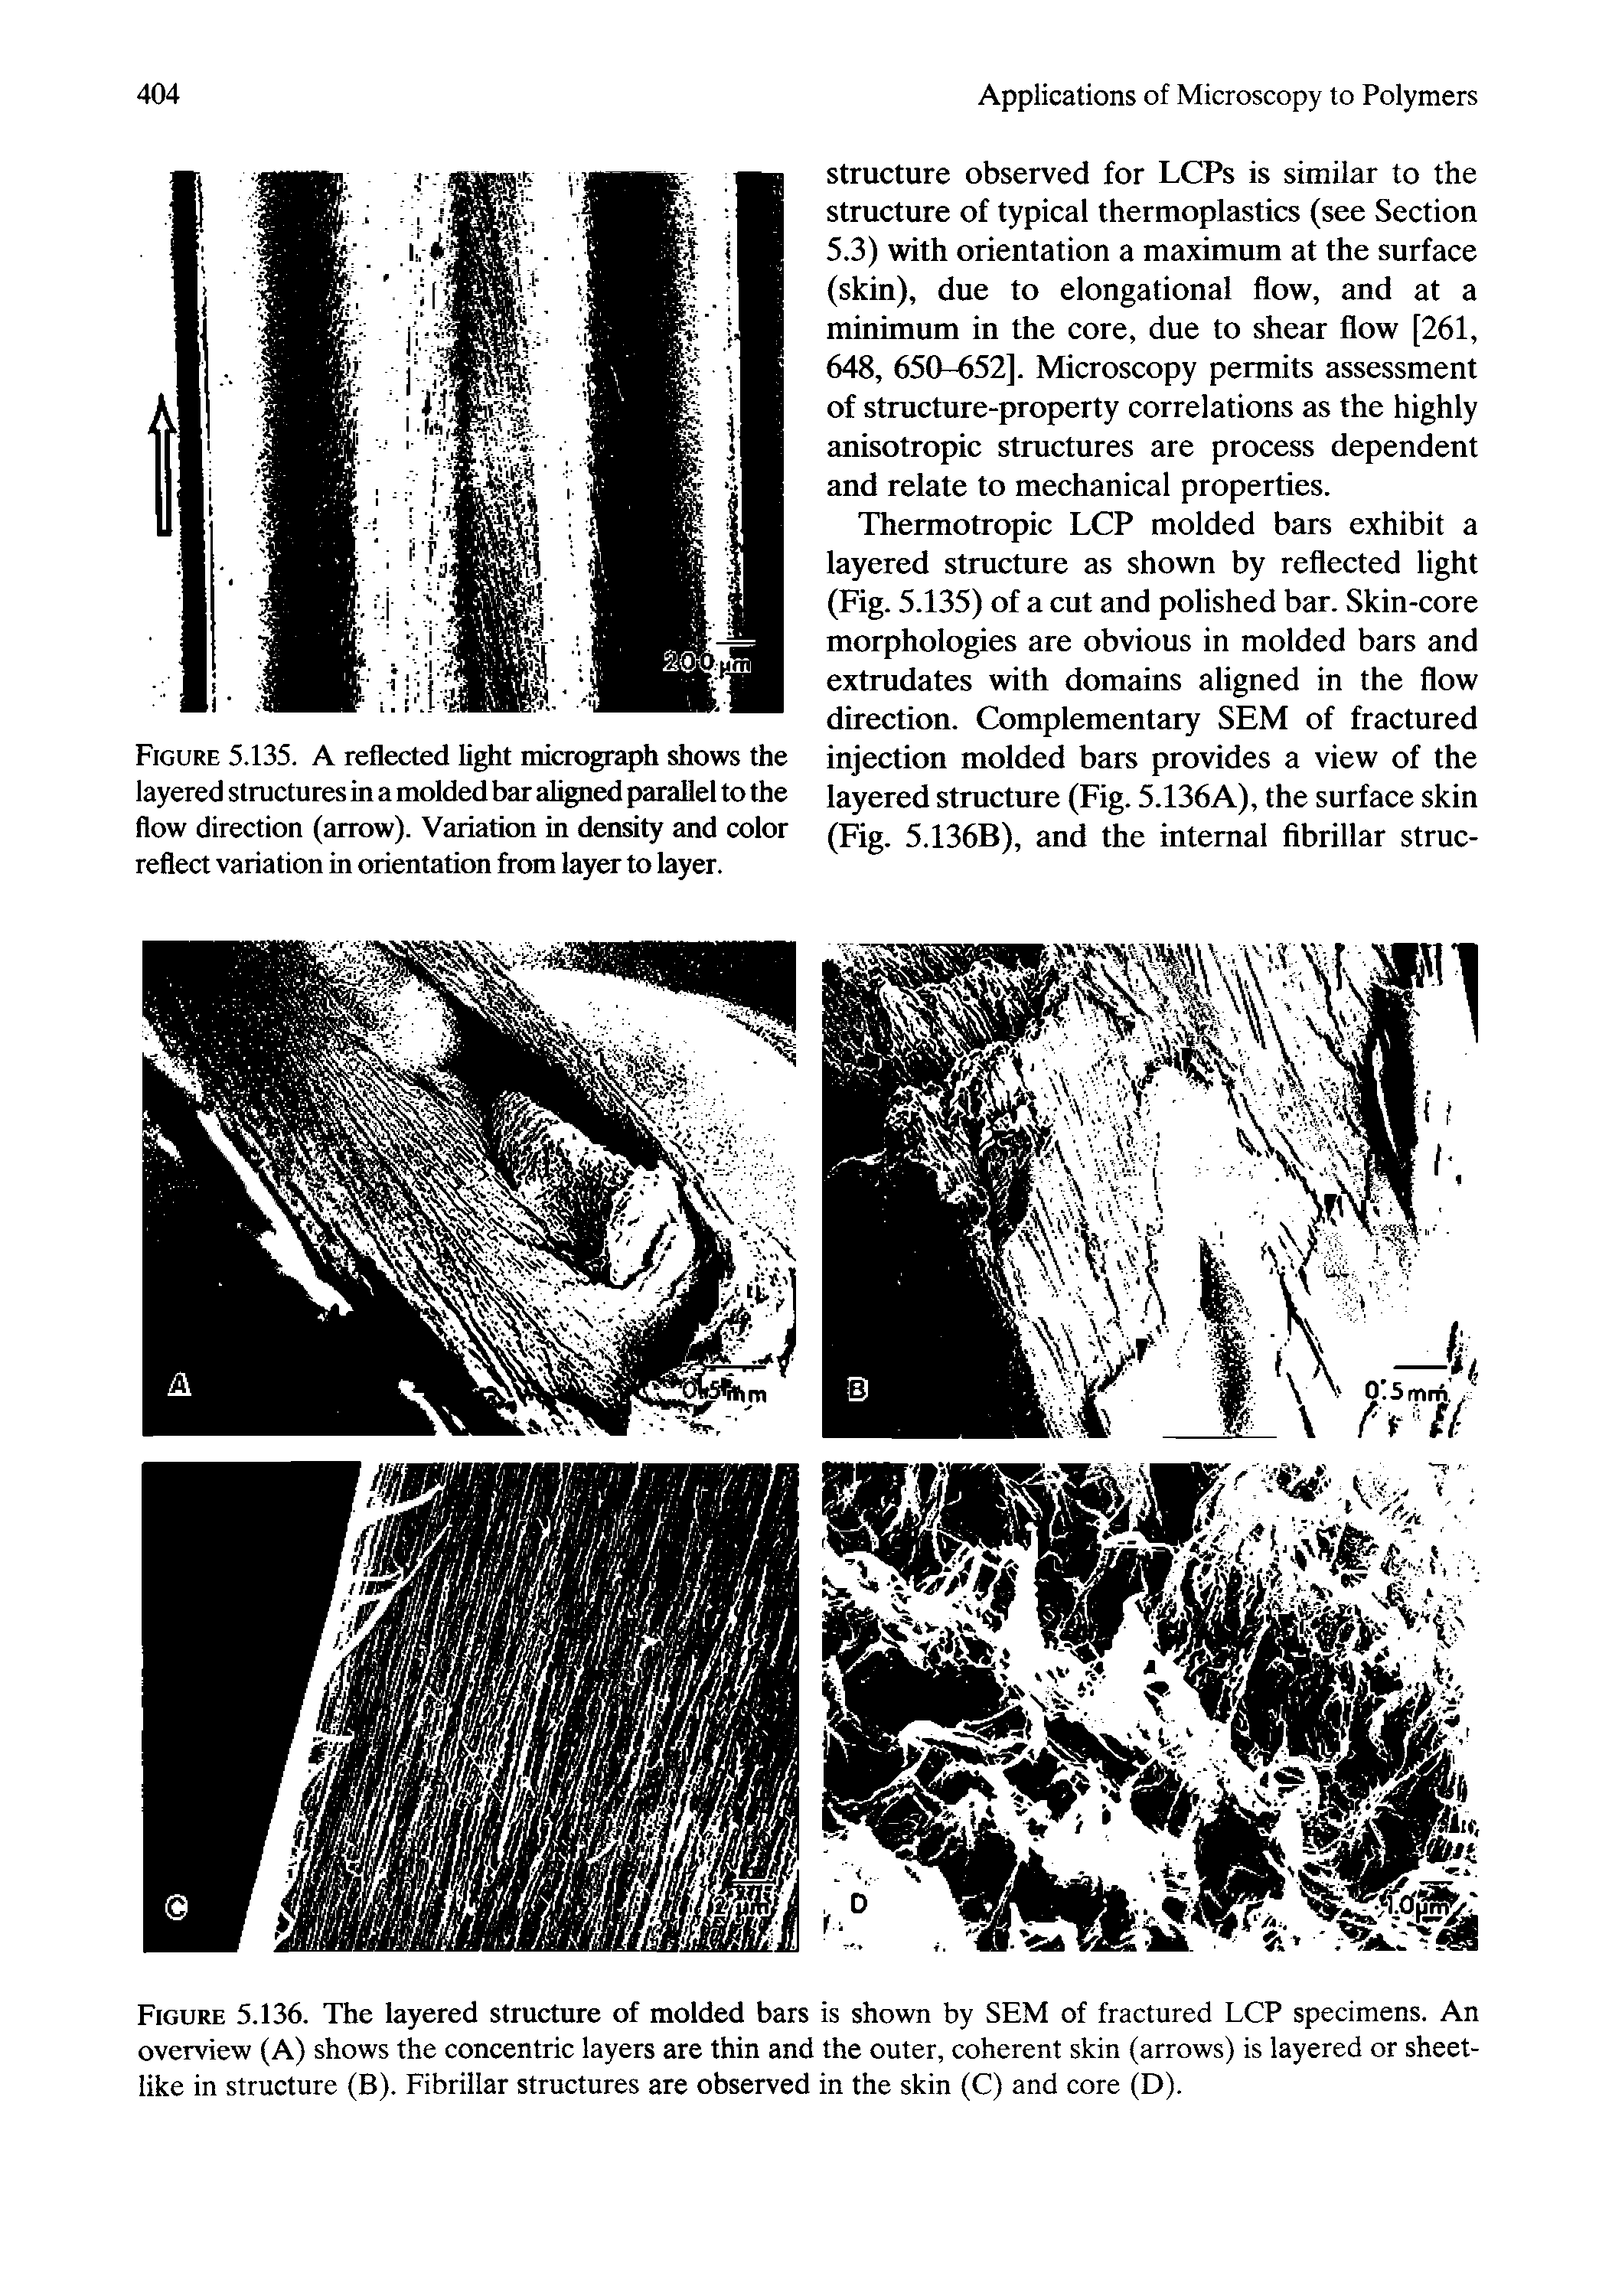 Figure 5.135. A reflected light micrograph shows the layered structures in a molded bar ahgned parallel to the flow direction (arrow). Variation in density and color reflect variation in orientation from layer to layer.